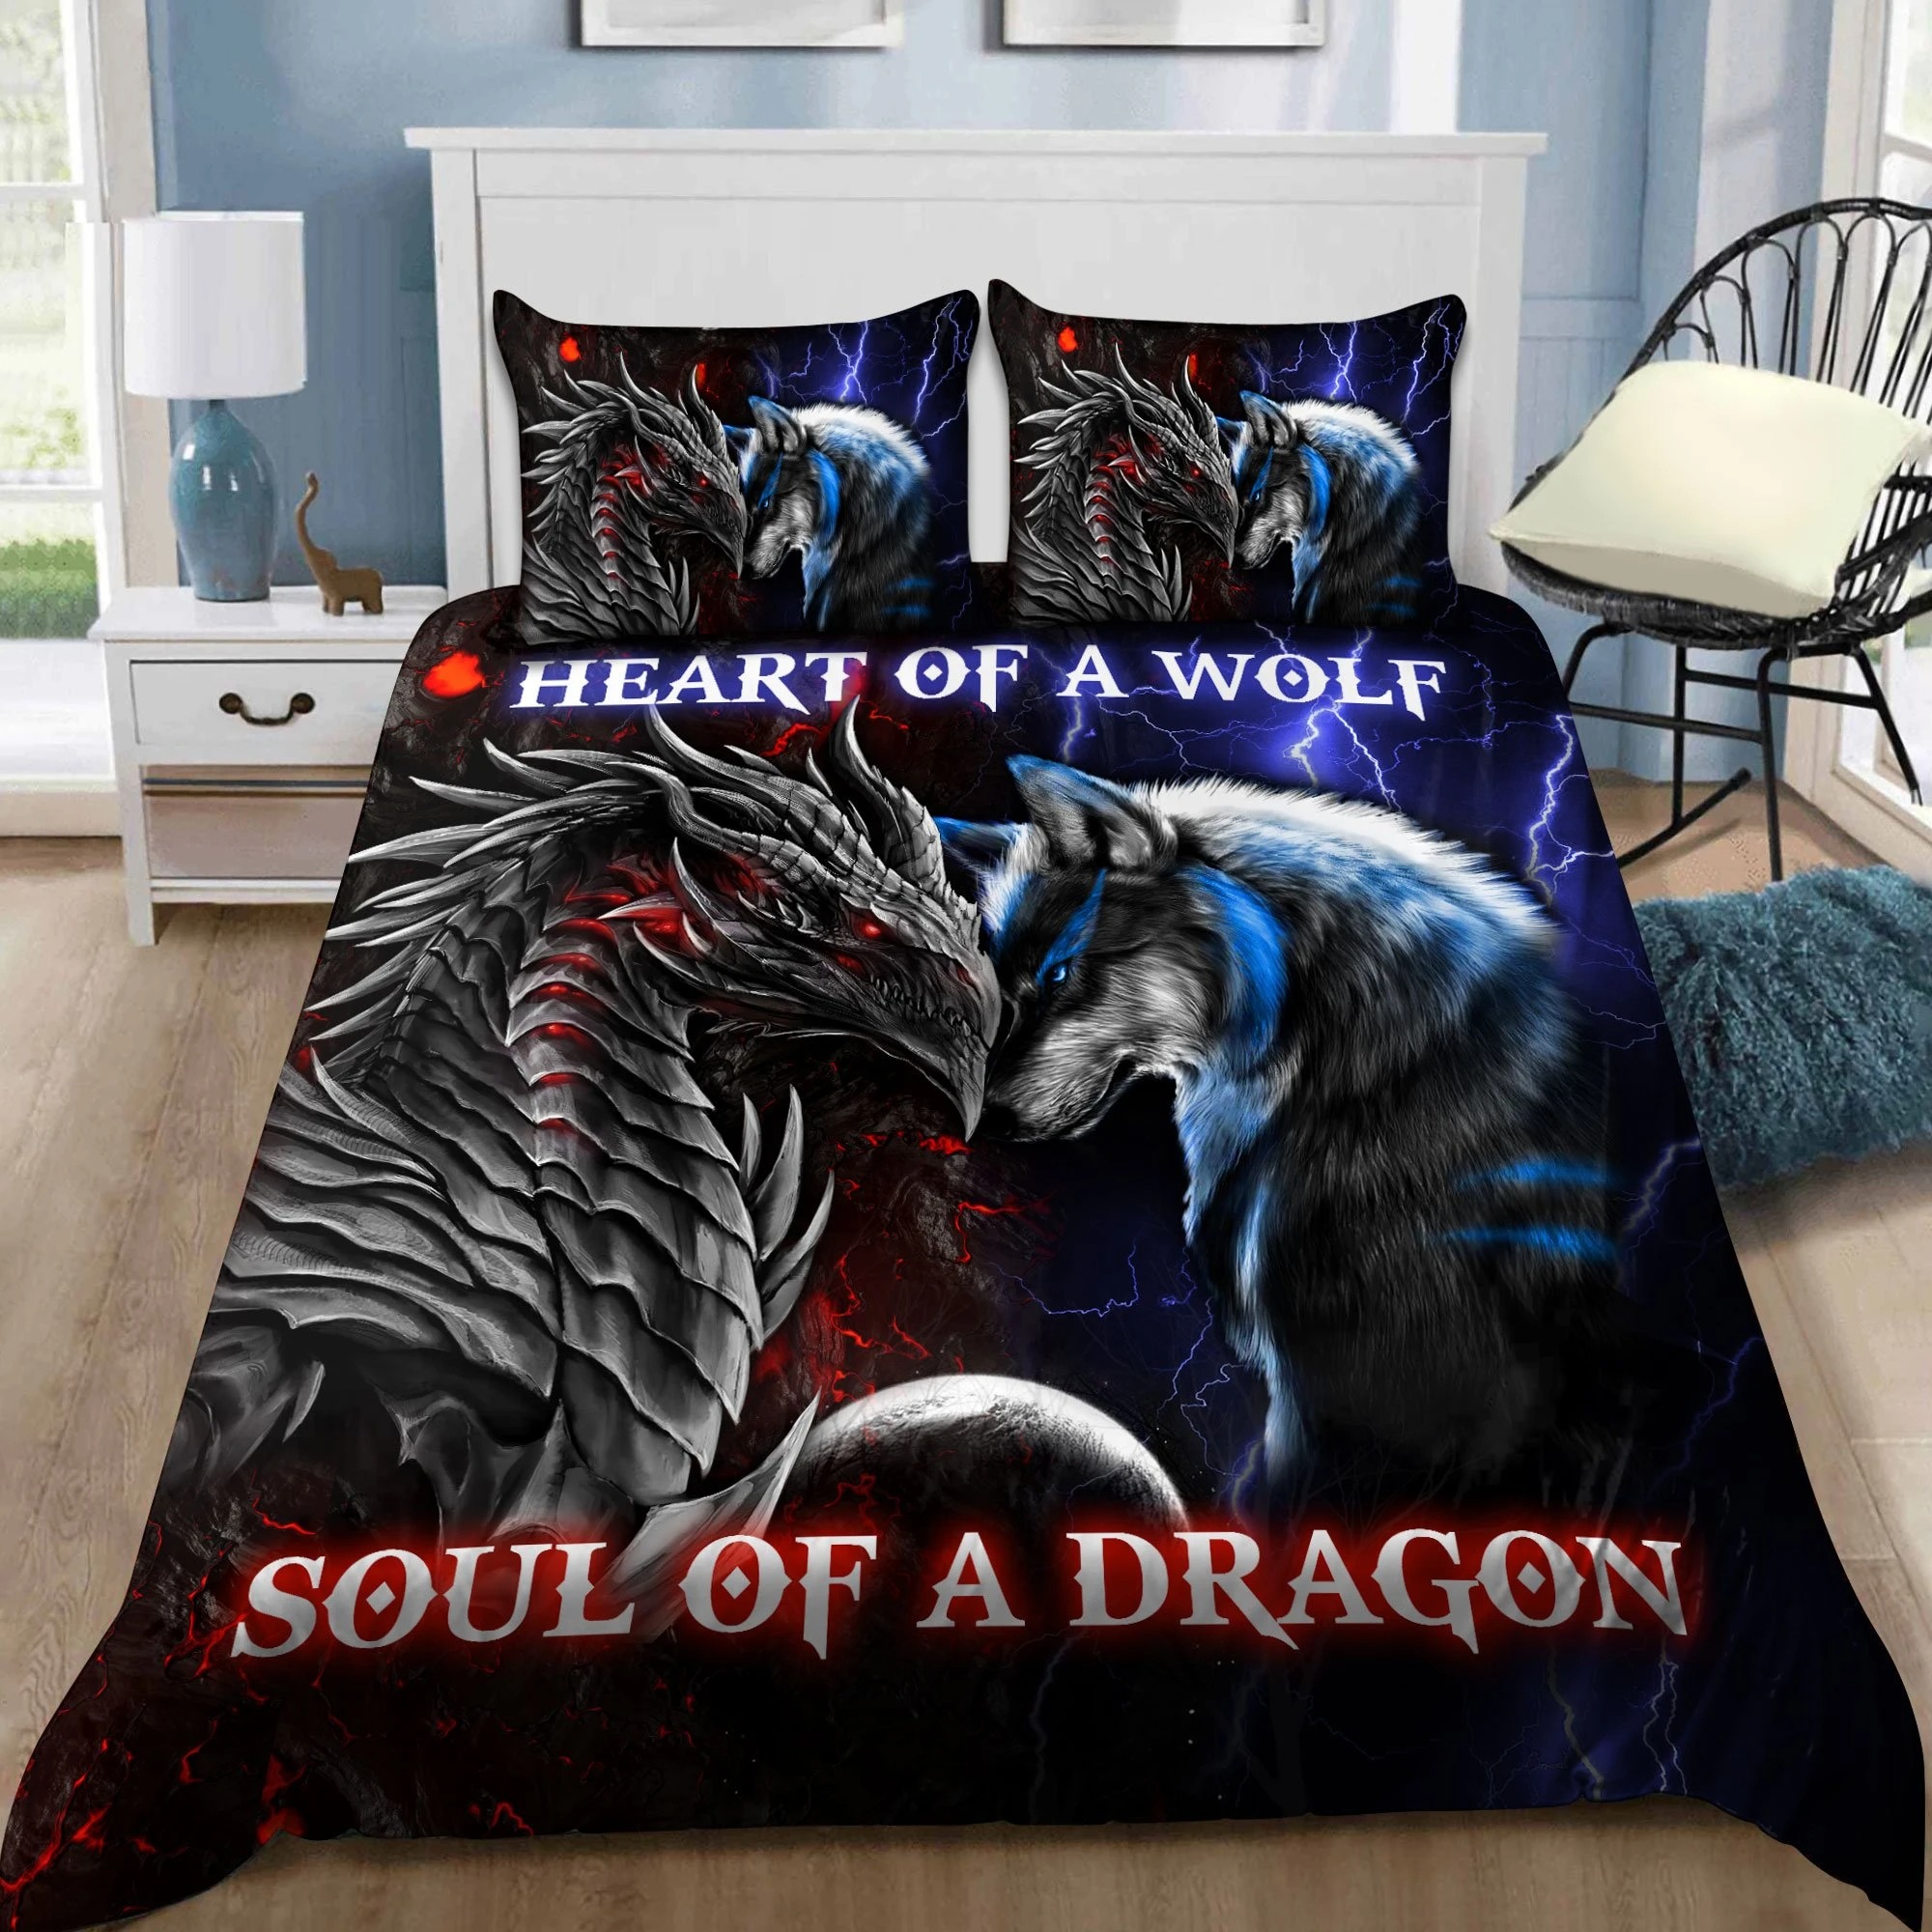 Heart of a wolf soul of a dragon bedding set